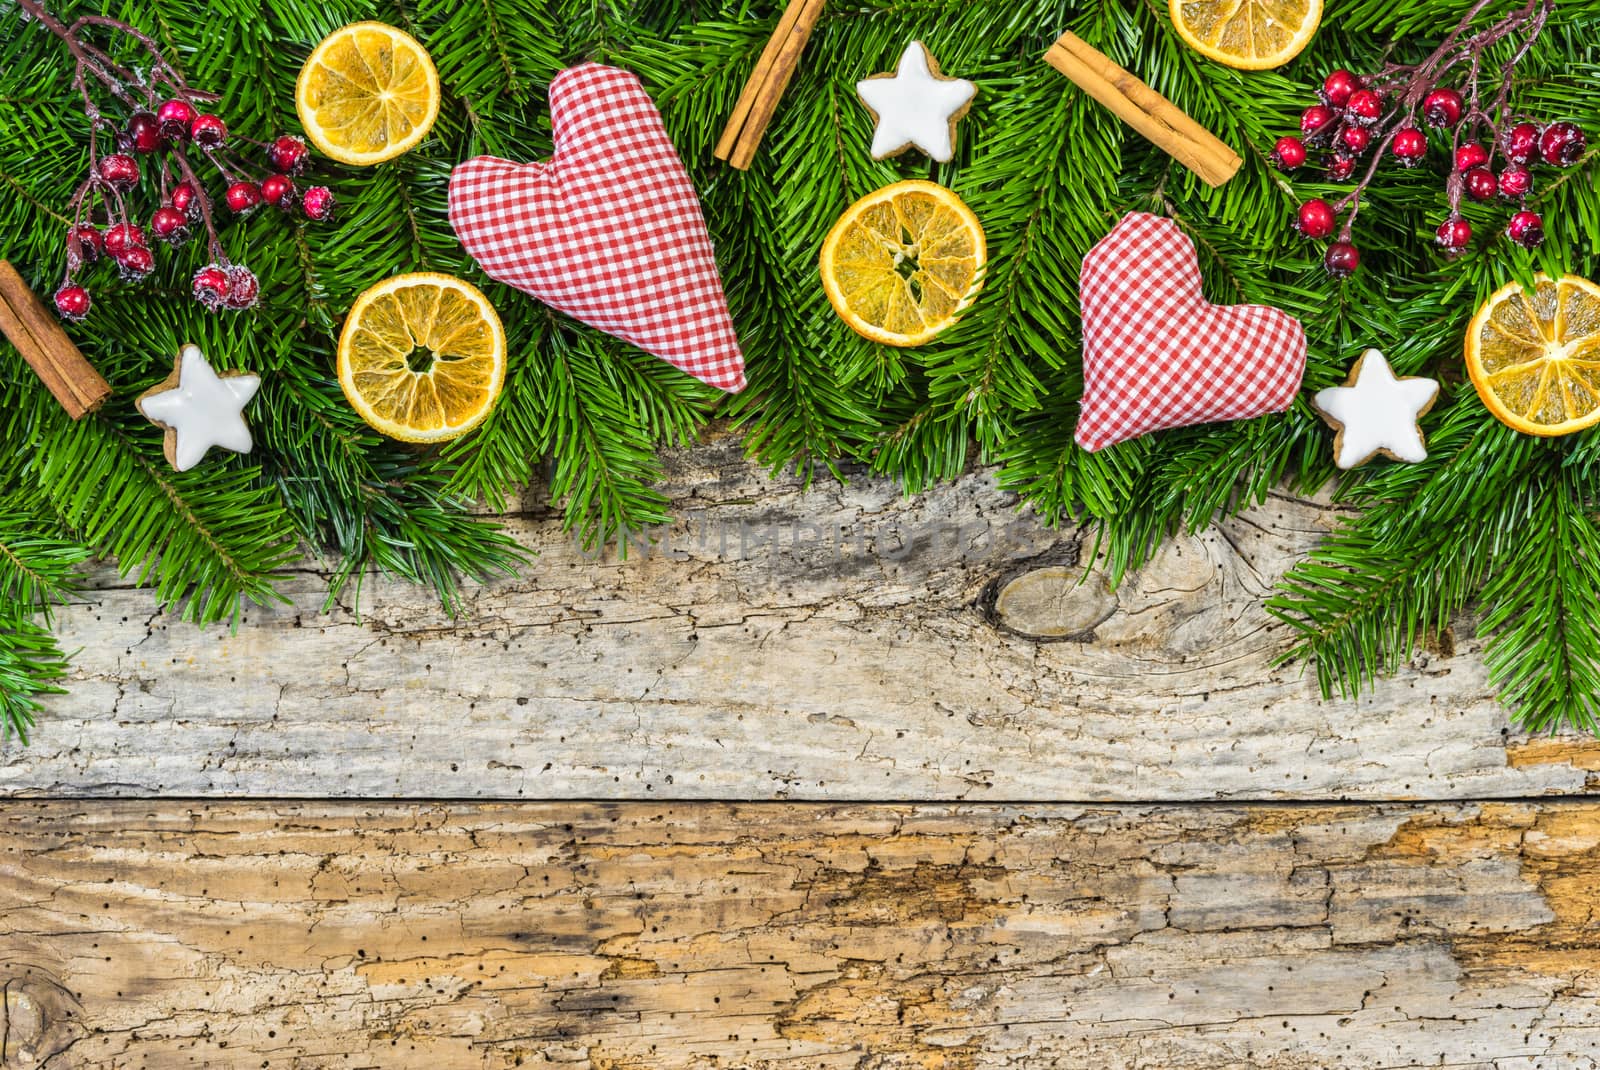 Xmas decoration with hearts and natural elements on wooden background with copy space